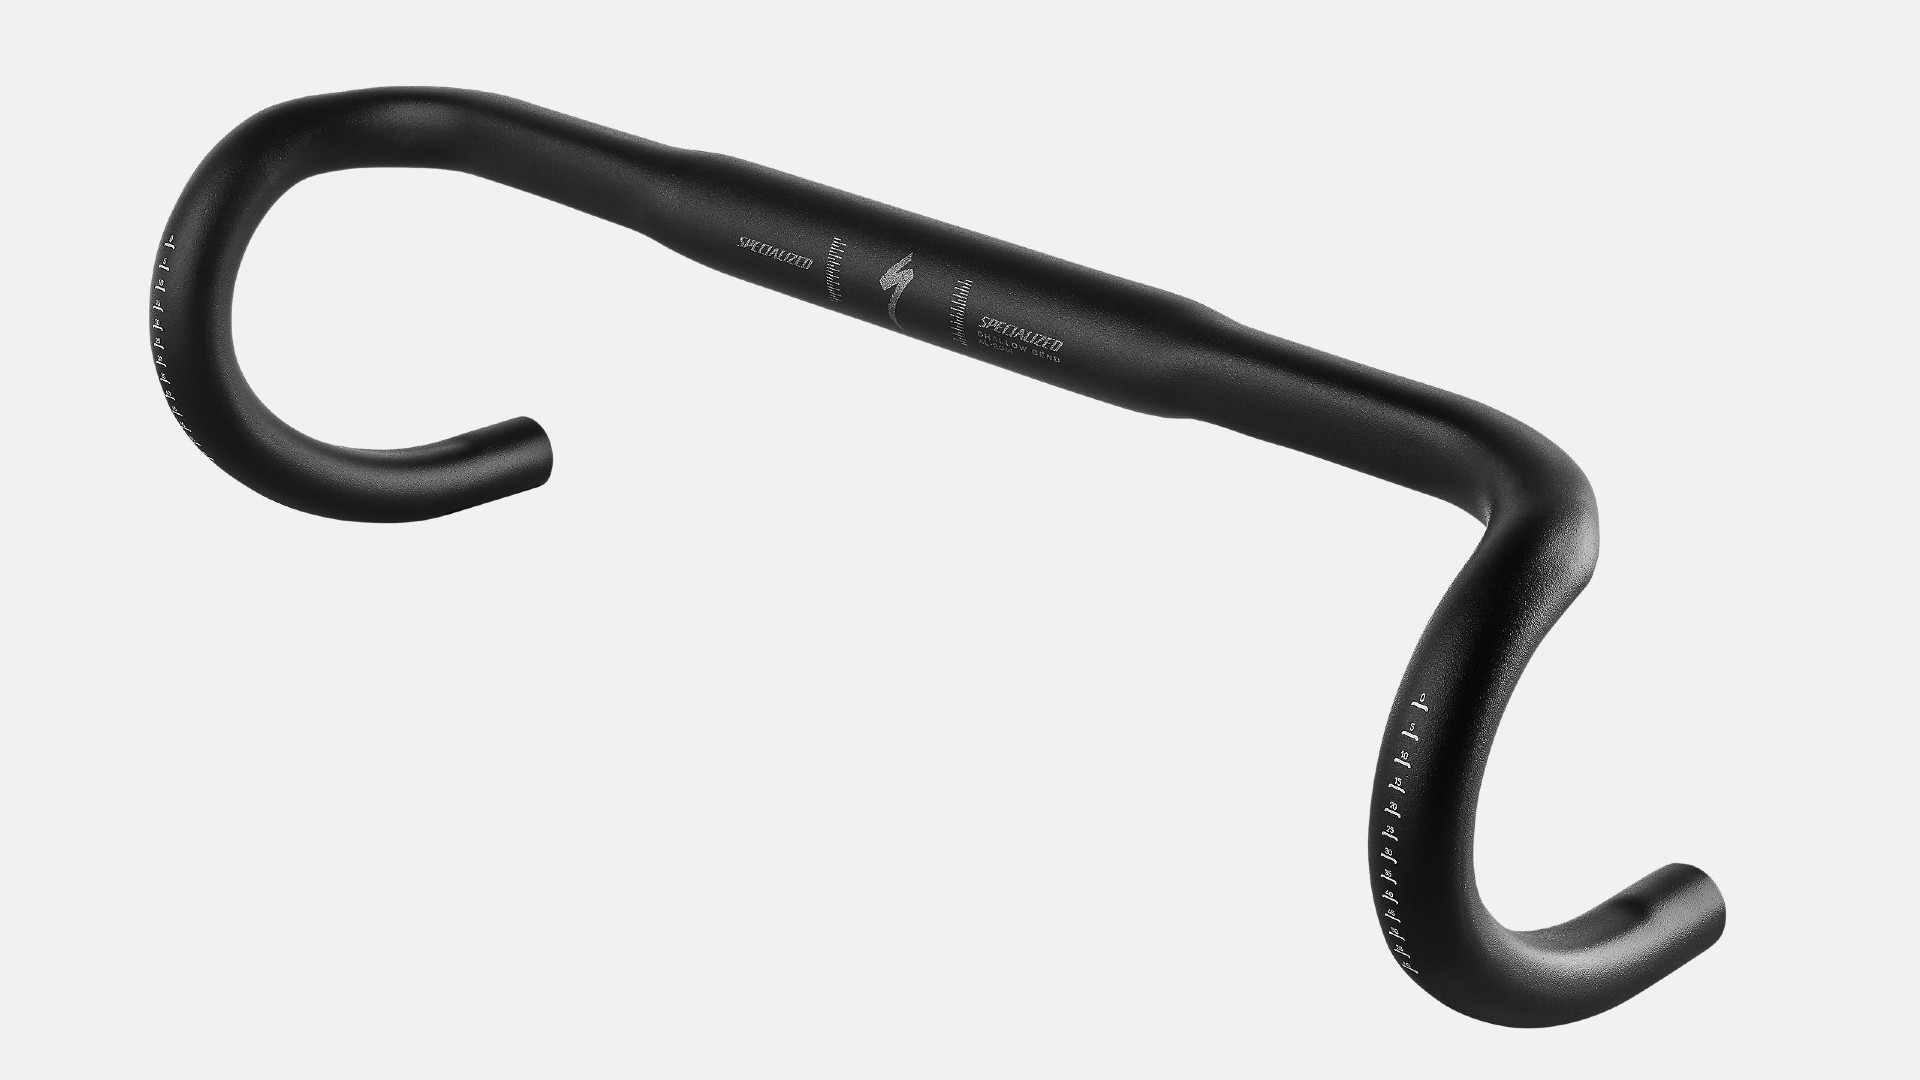 Specialized Expert Alloy Shallow bend road handlebar reviewed